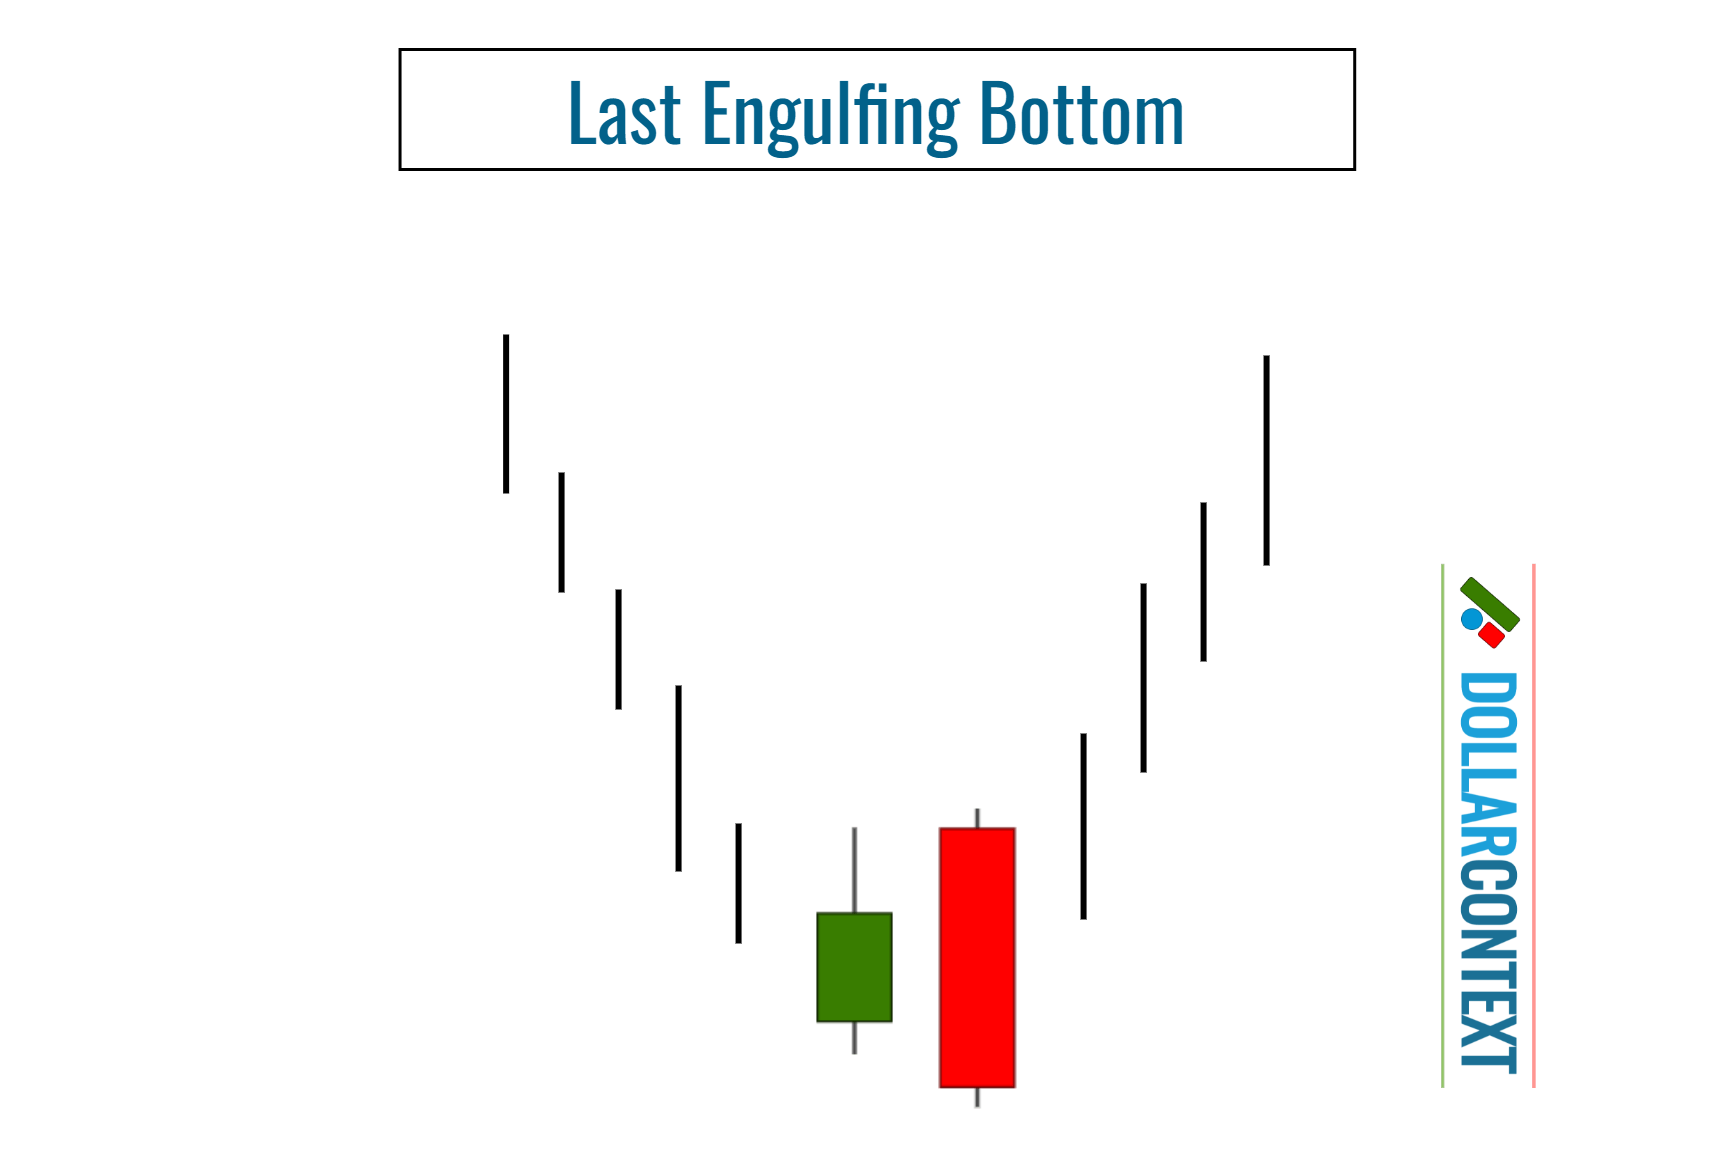 Shape and Context of a Last Engulfing Bottom